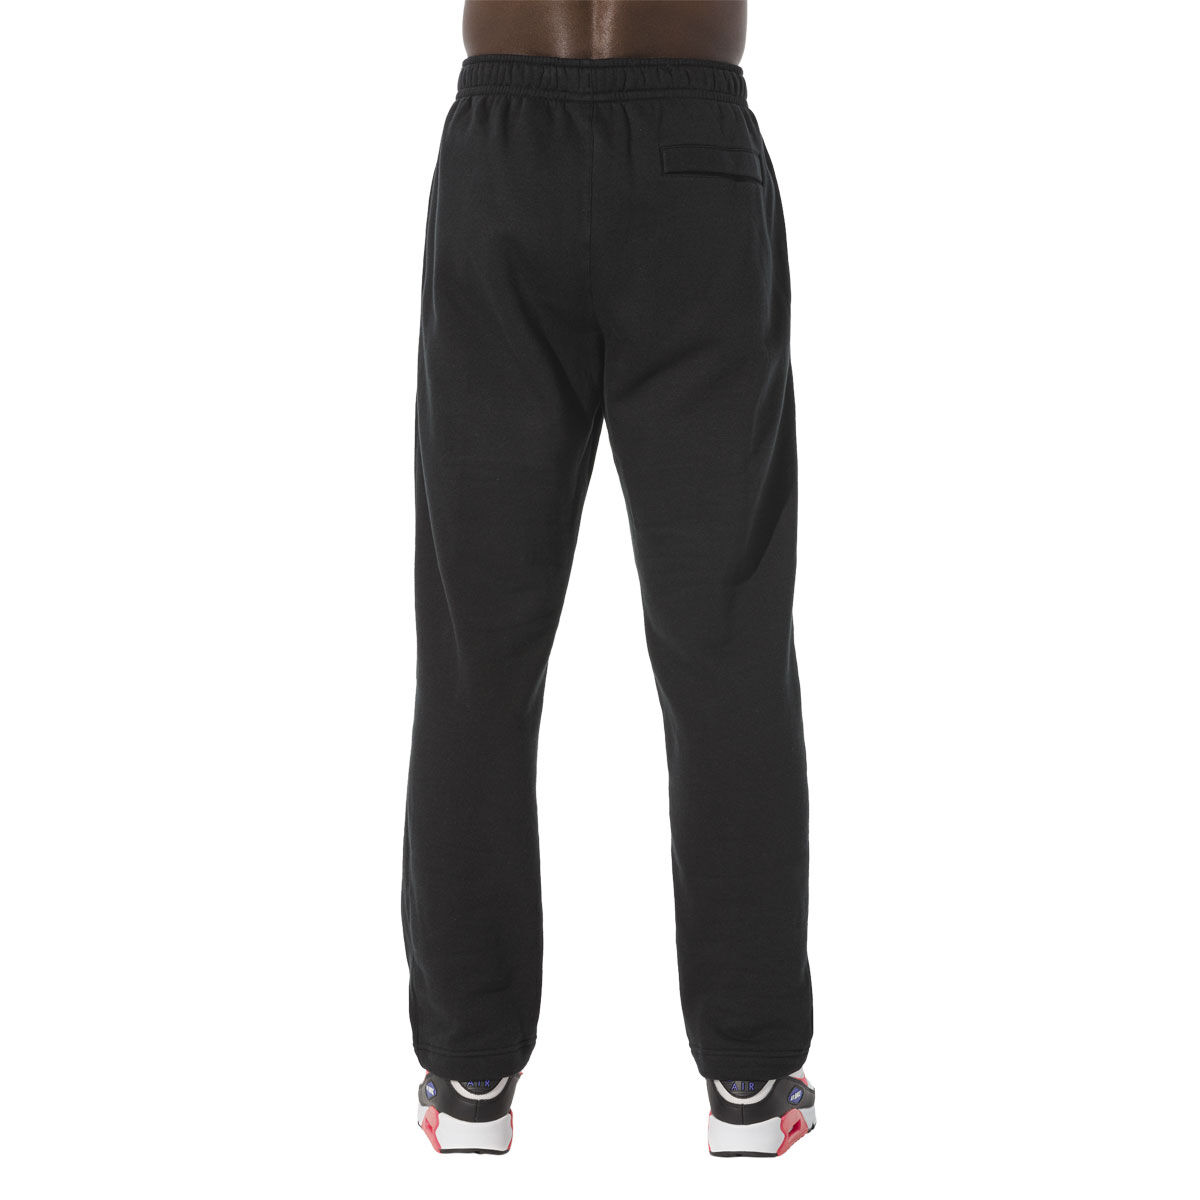 Review One Travel Writer Love These Mens Sweatpants